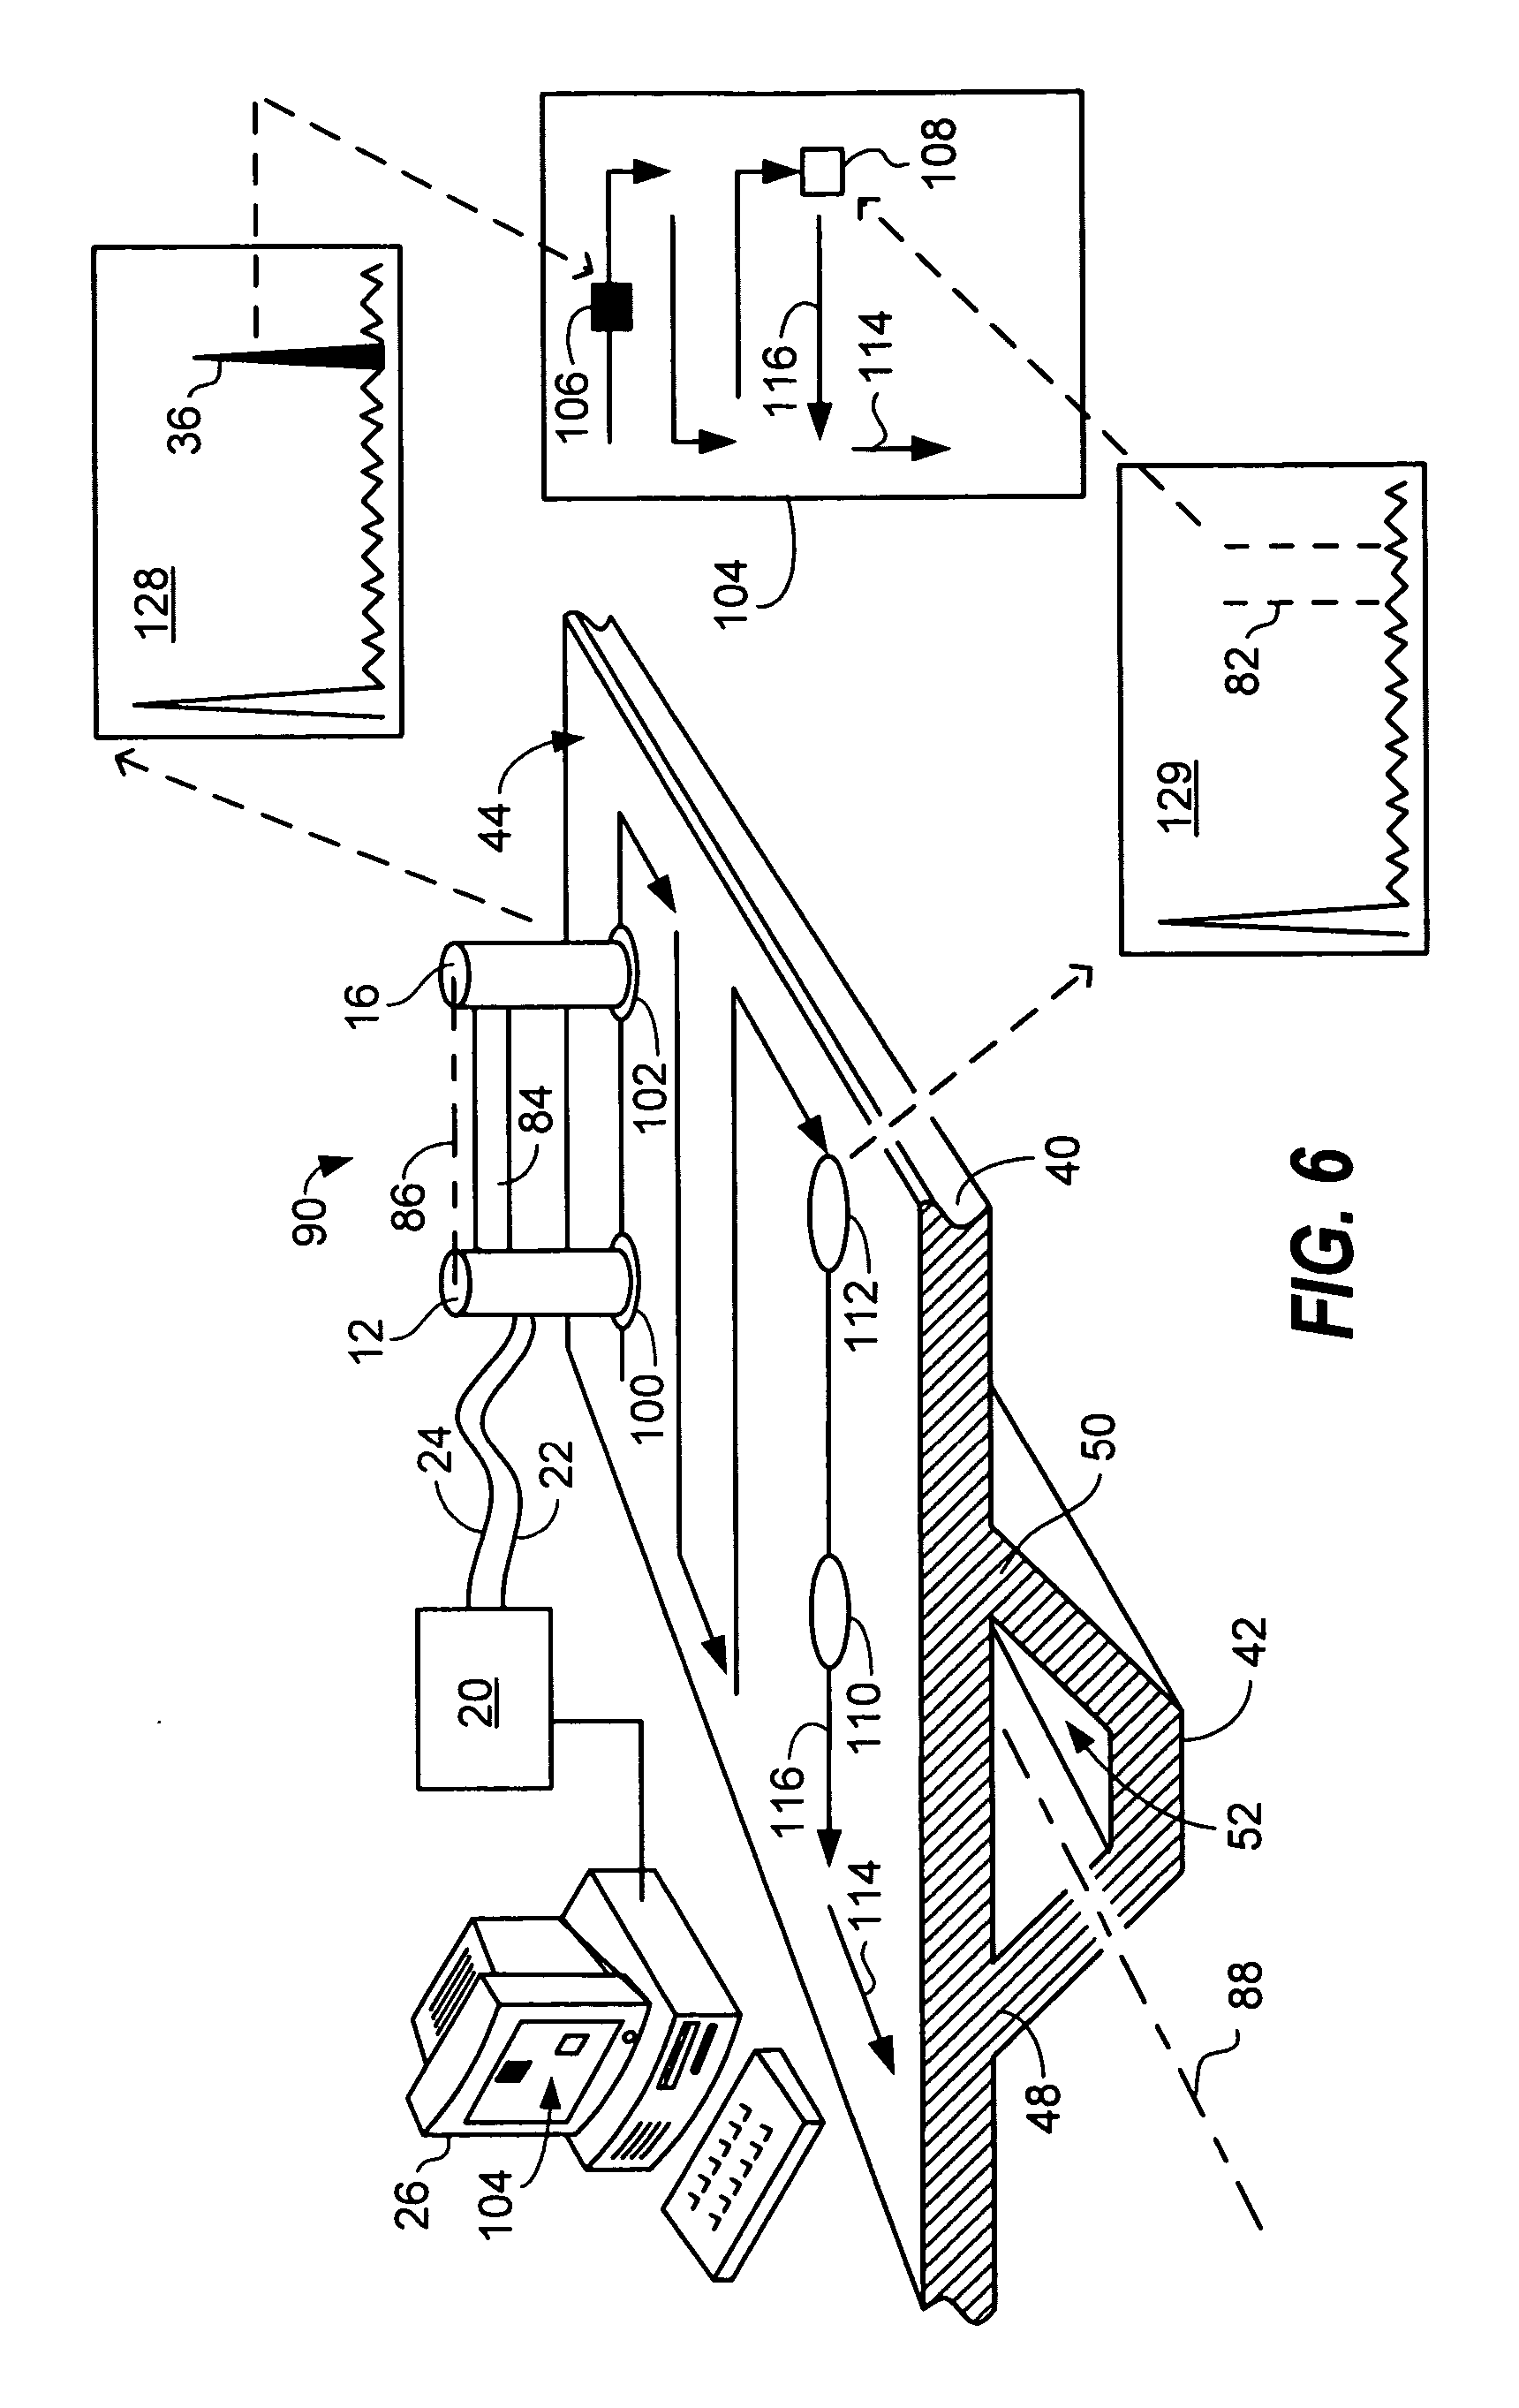 Single-side ultrasonic inspection systems and methods